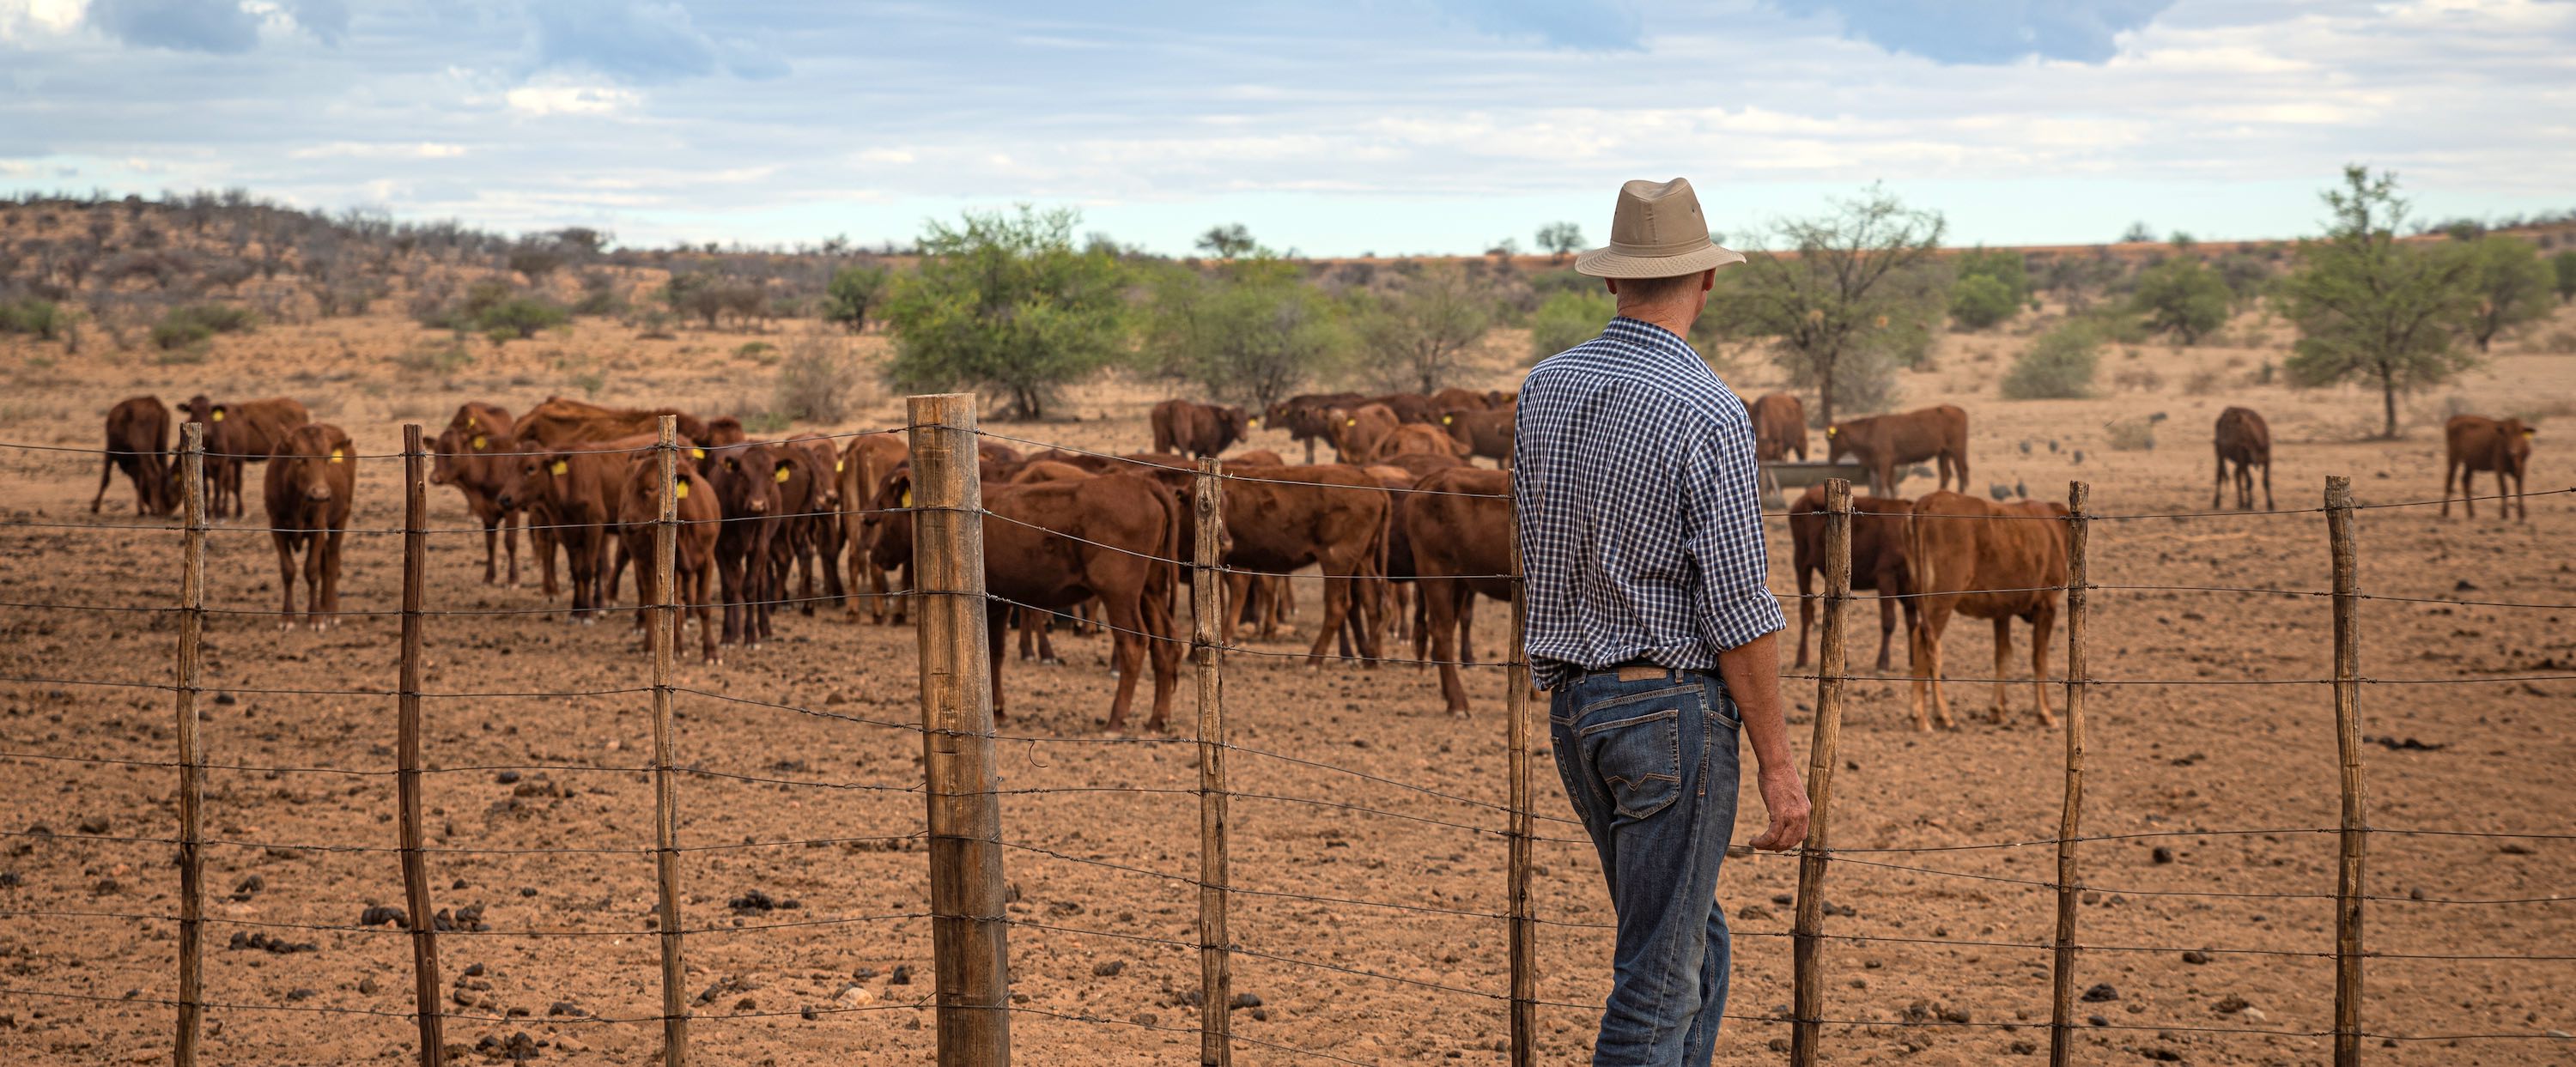 A man with his back to the camera looks over a fence at a herd of cattle.